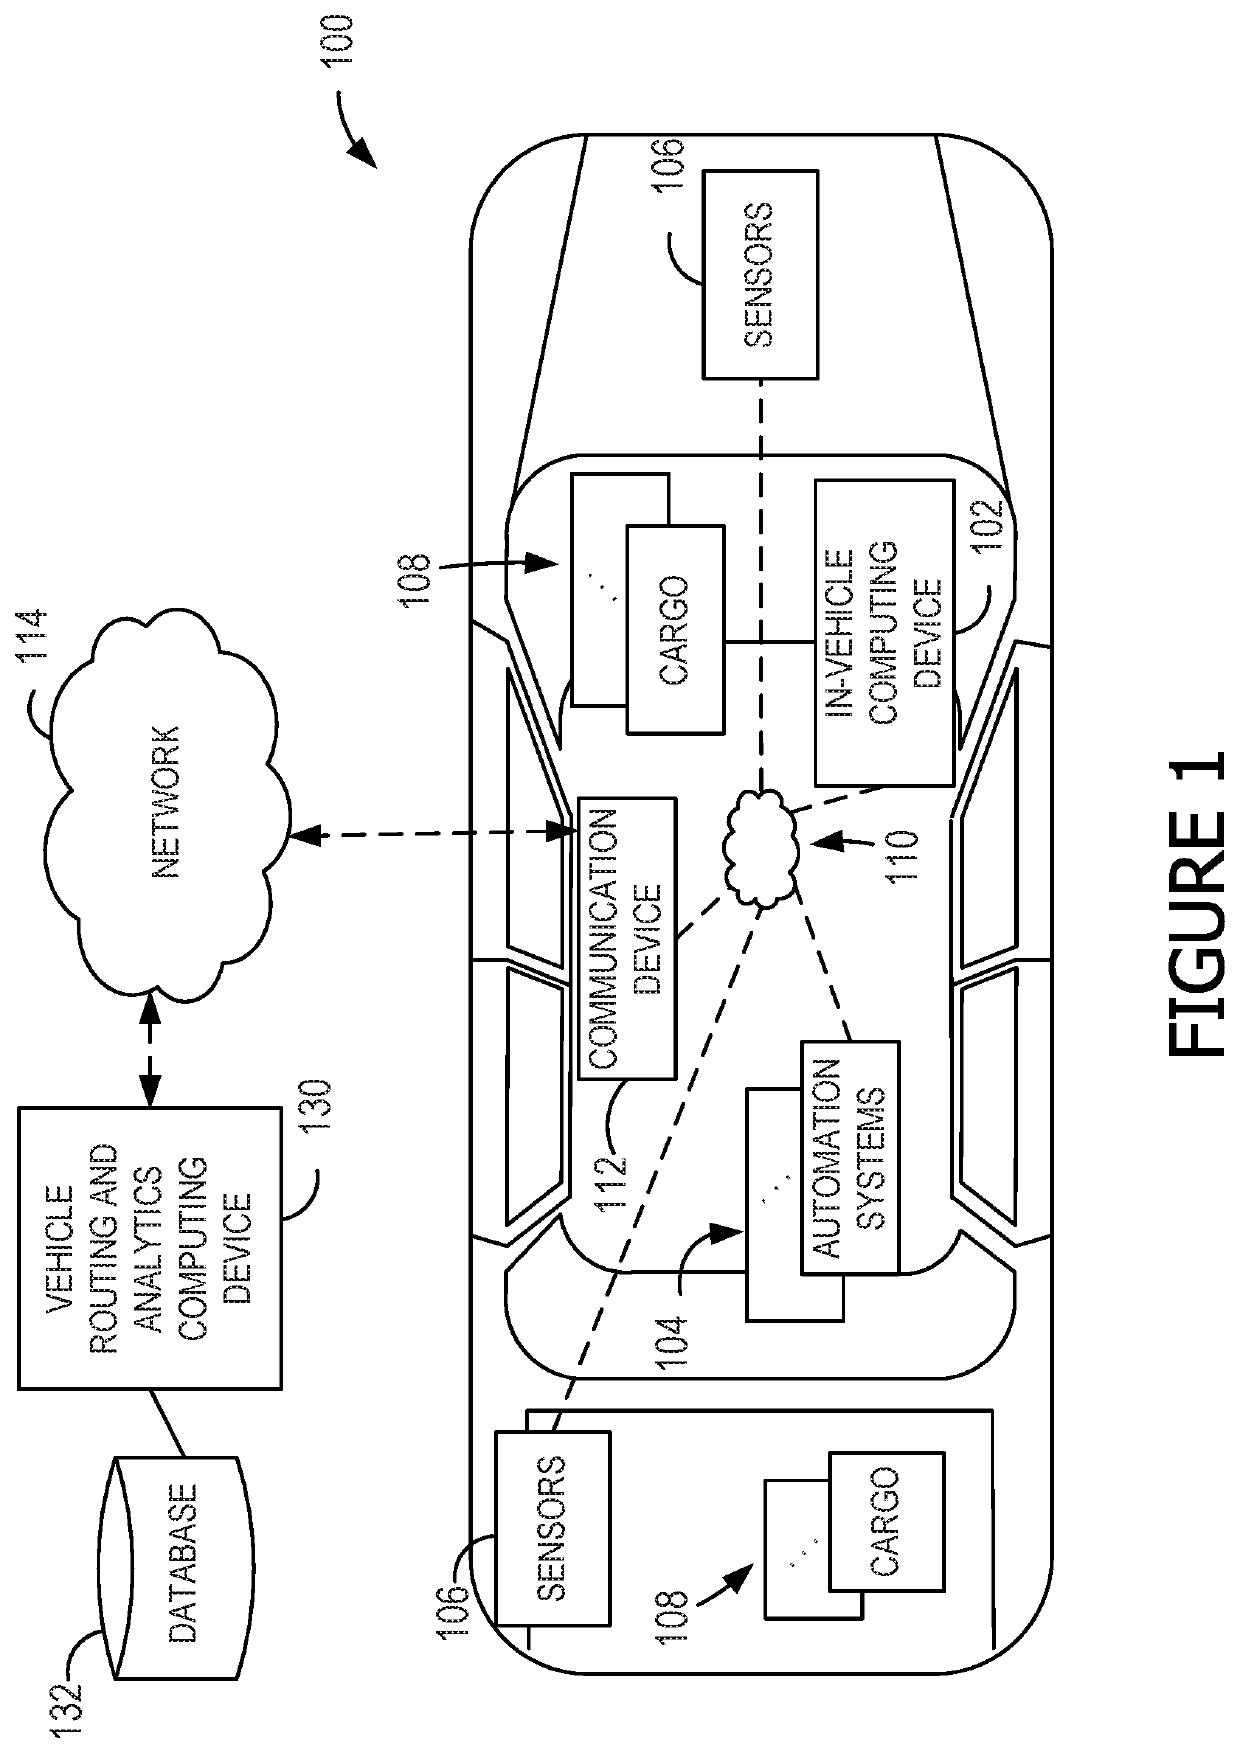 Systems and methods for dynamically generating optimal routes for management of multiple vehicles